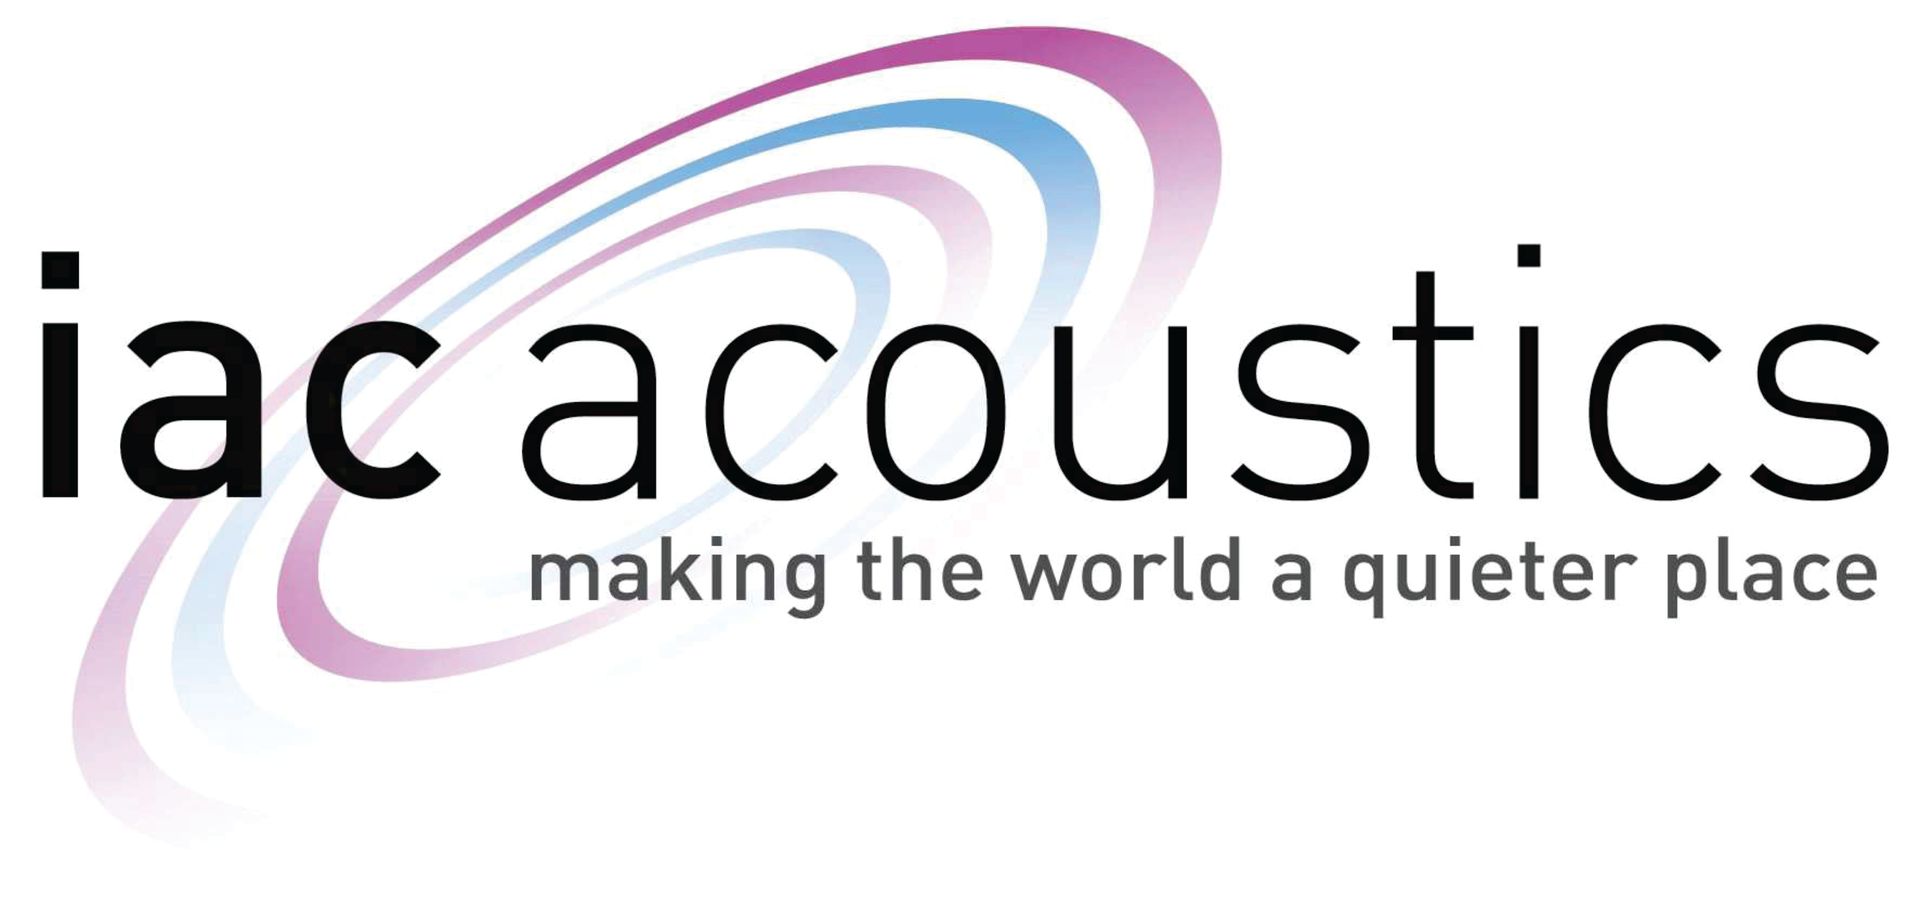 A logo for iac acoustics making the world a quieter place